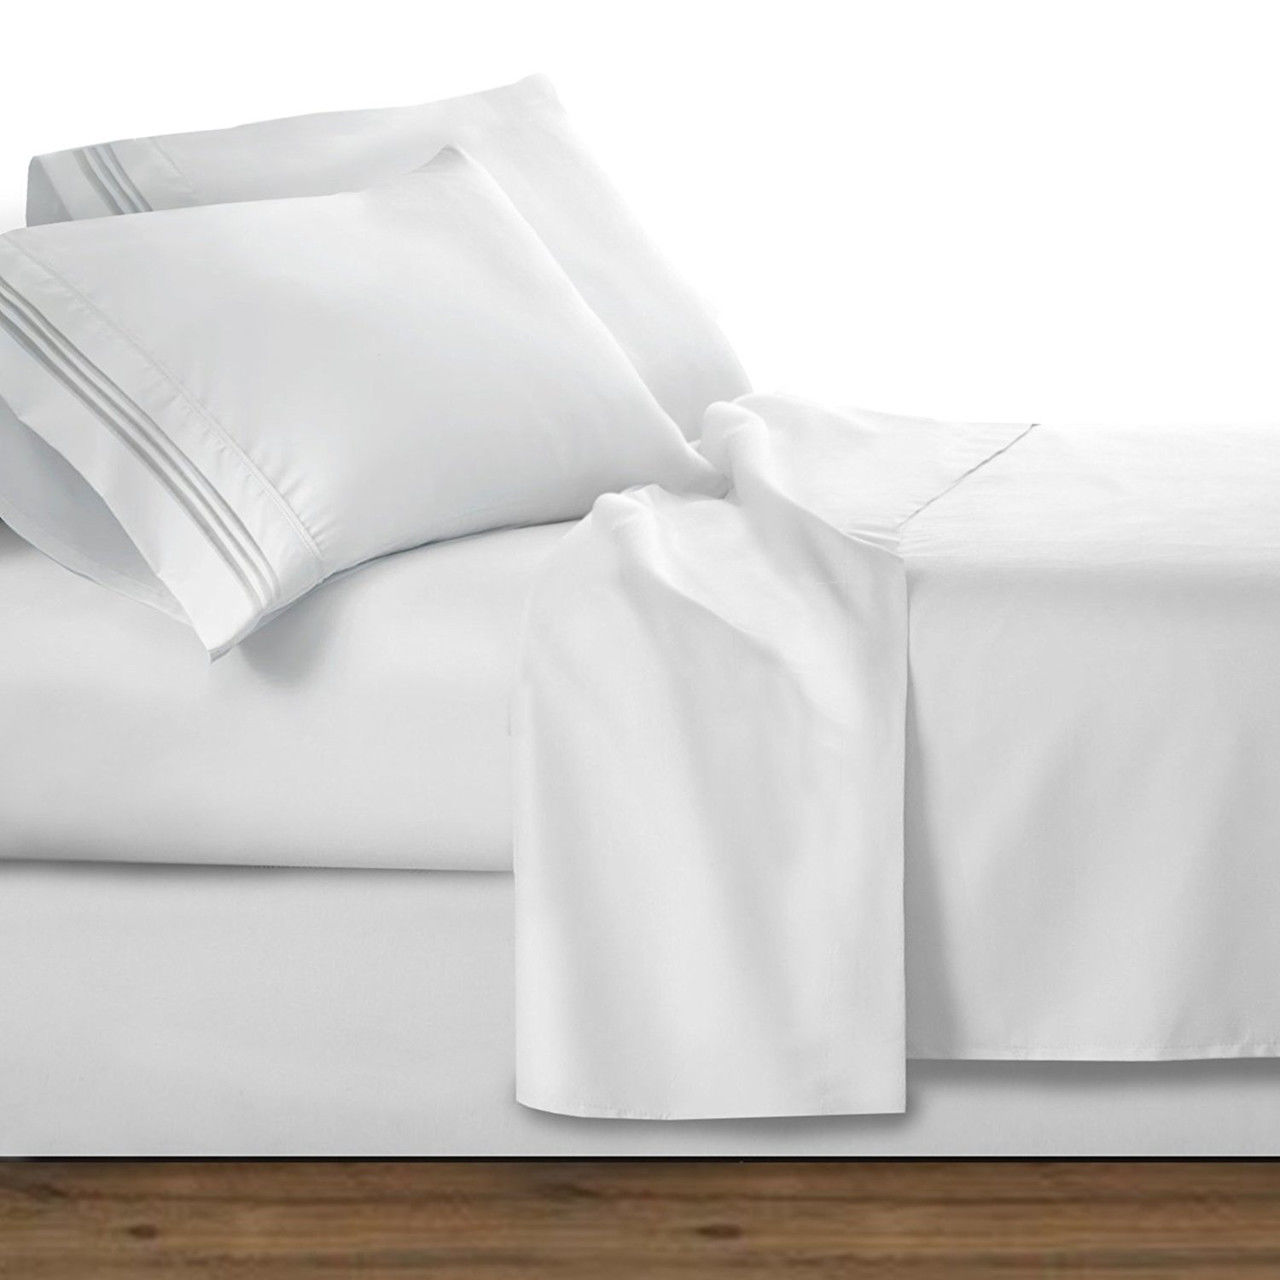 Is this sheet set made of microfiber blend bed frames?